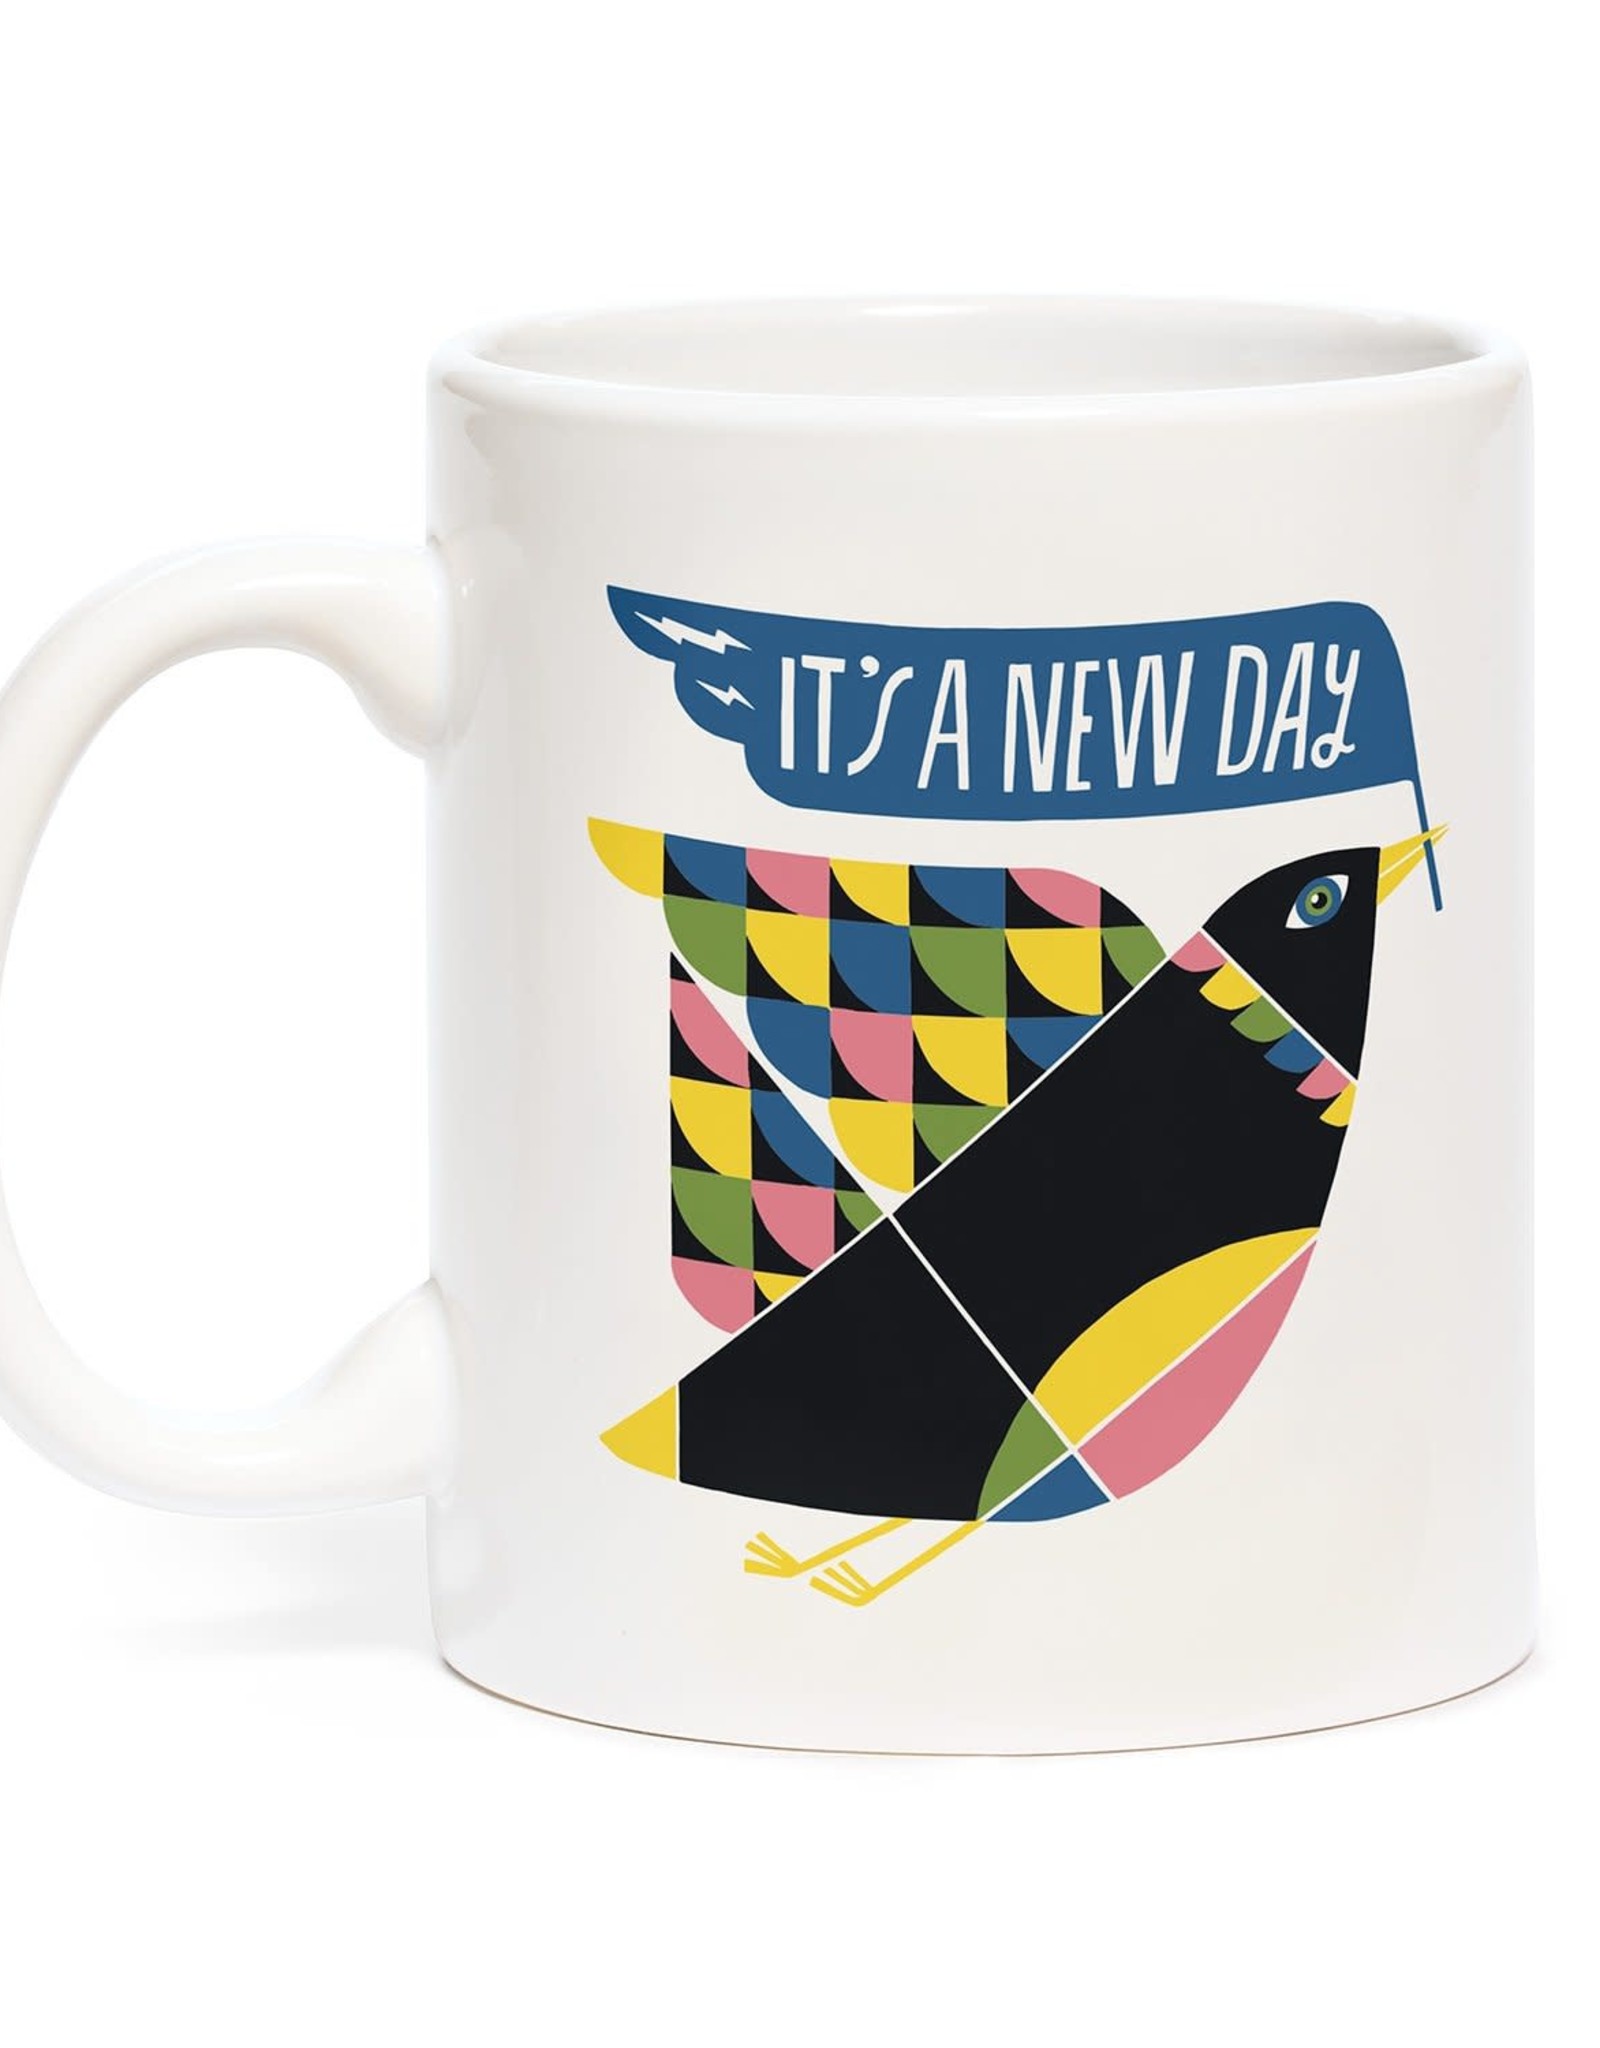 Emily McDowell “It’s a New Day” Mug by Emily McDowell